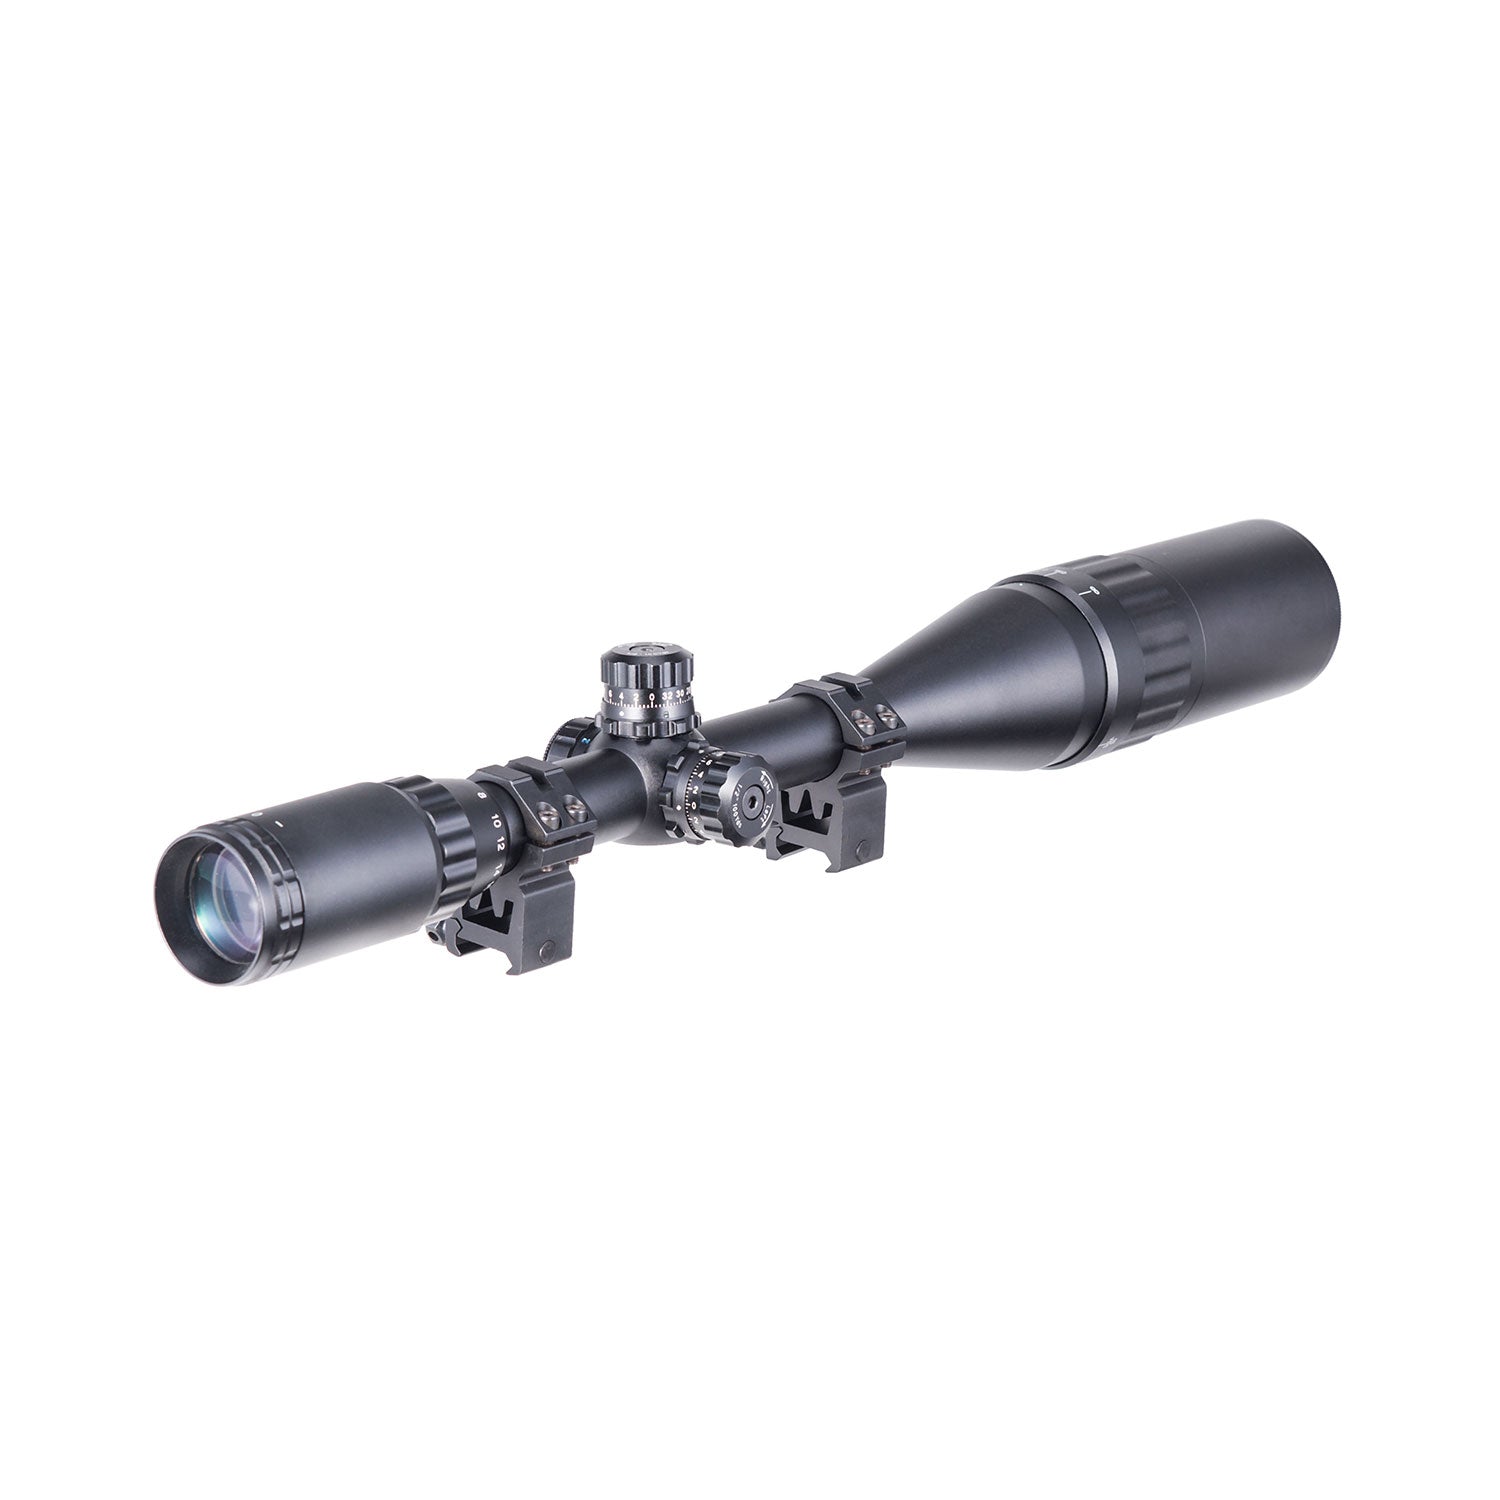 6-24x50 AO illuminated mil dot riflescope with sunshade tube, flip-up cap and ring mount high-profile picatinny rings